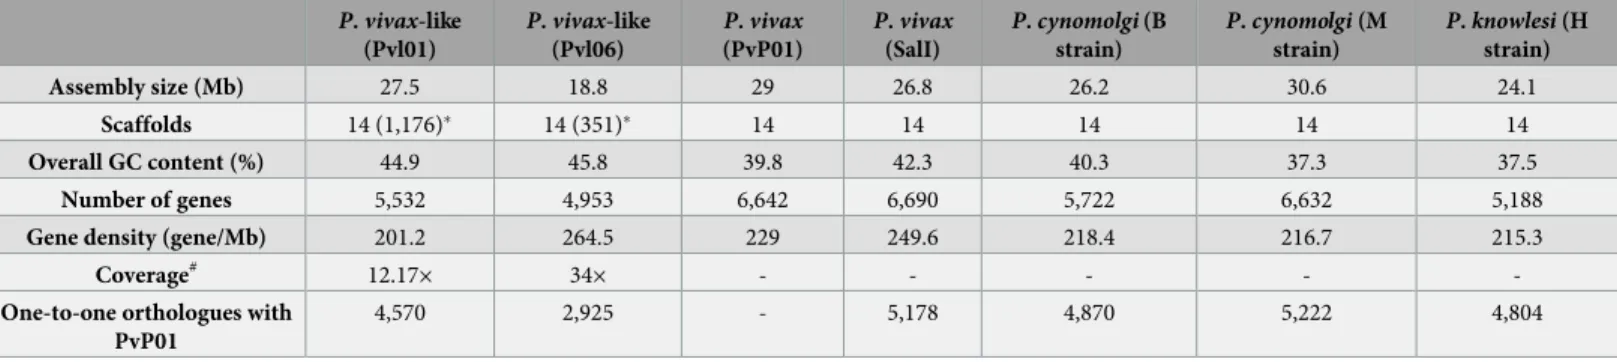 Table 1. Genome features of the P. vivax-like Pvl01 (Illumina HiSeq sequenced) and Pvl06 (PacBio sequenced) strains, P